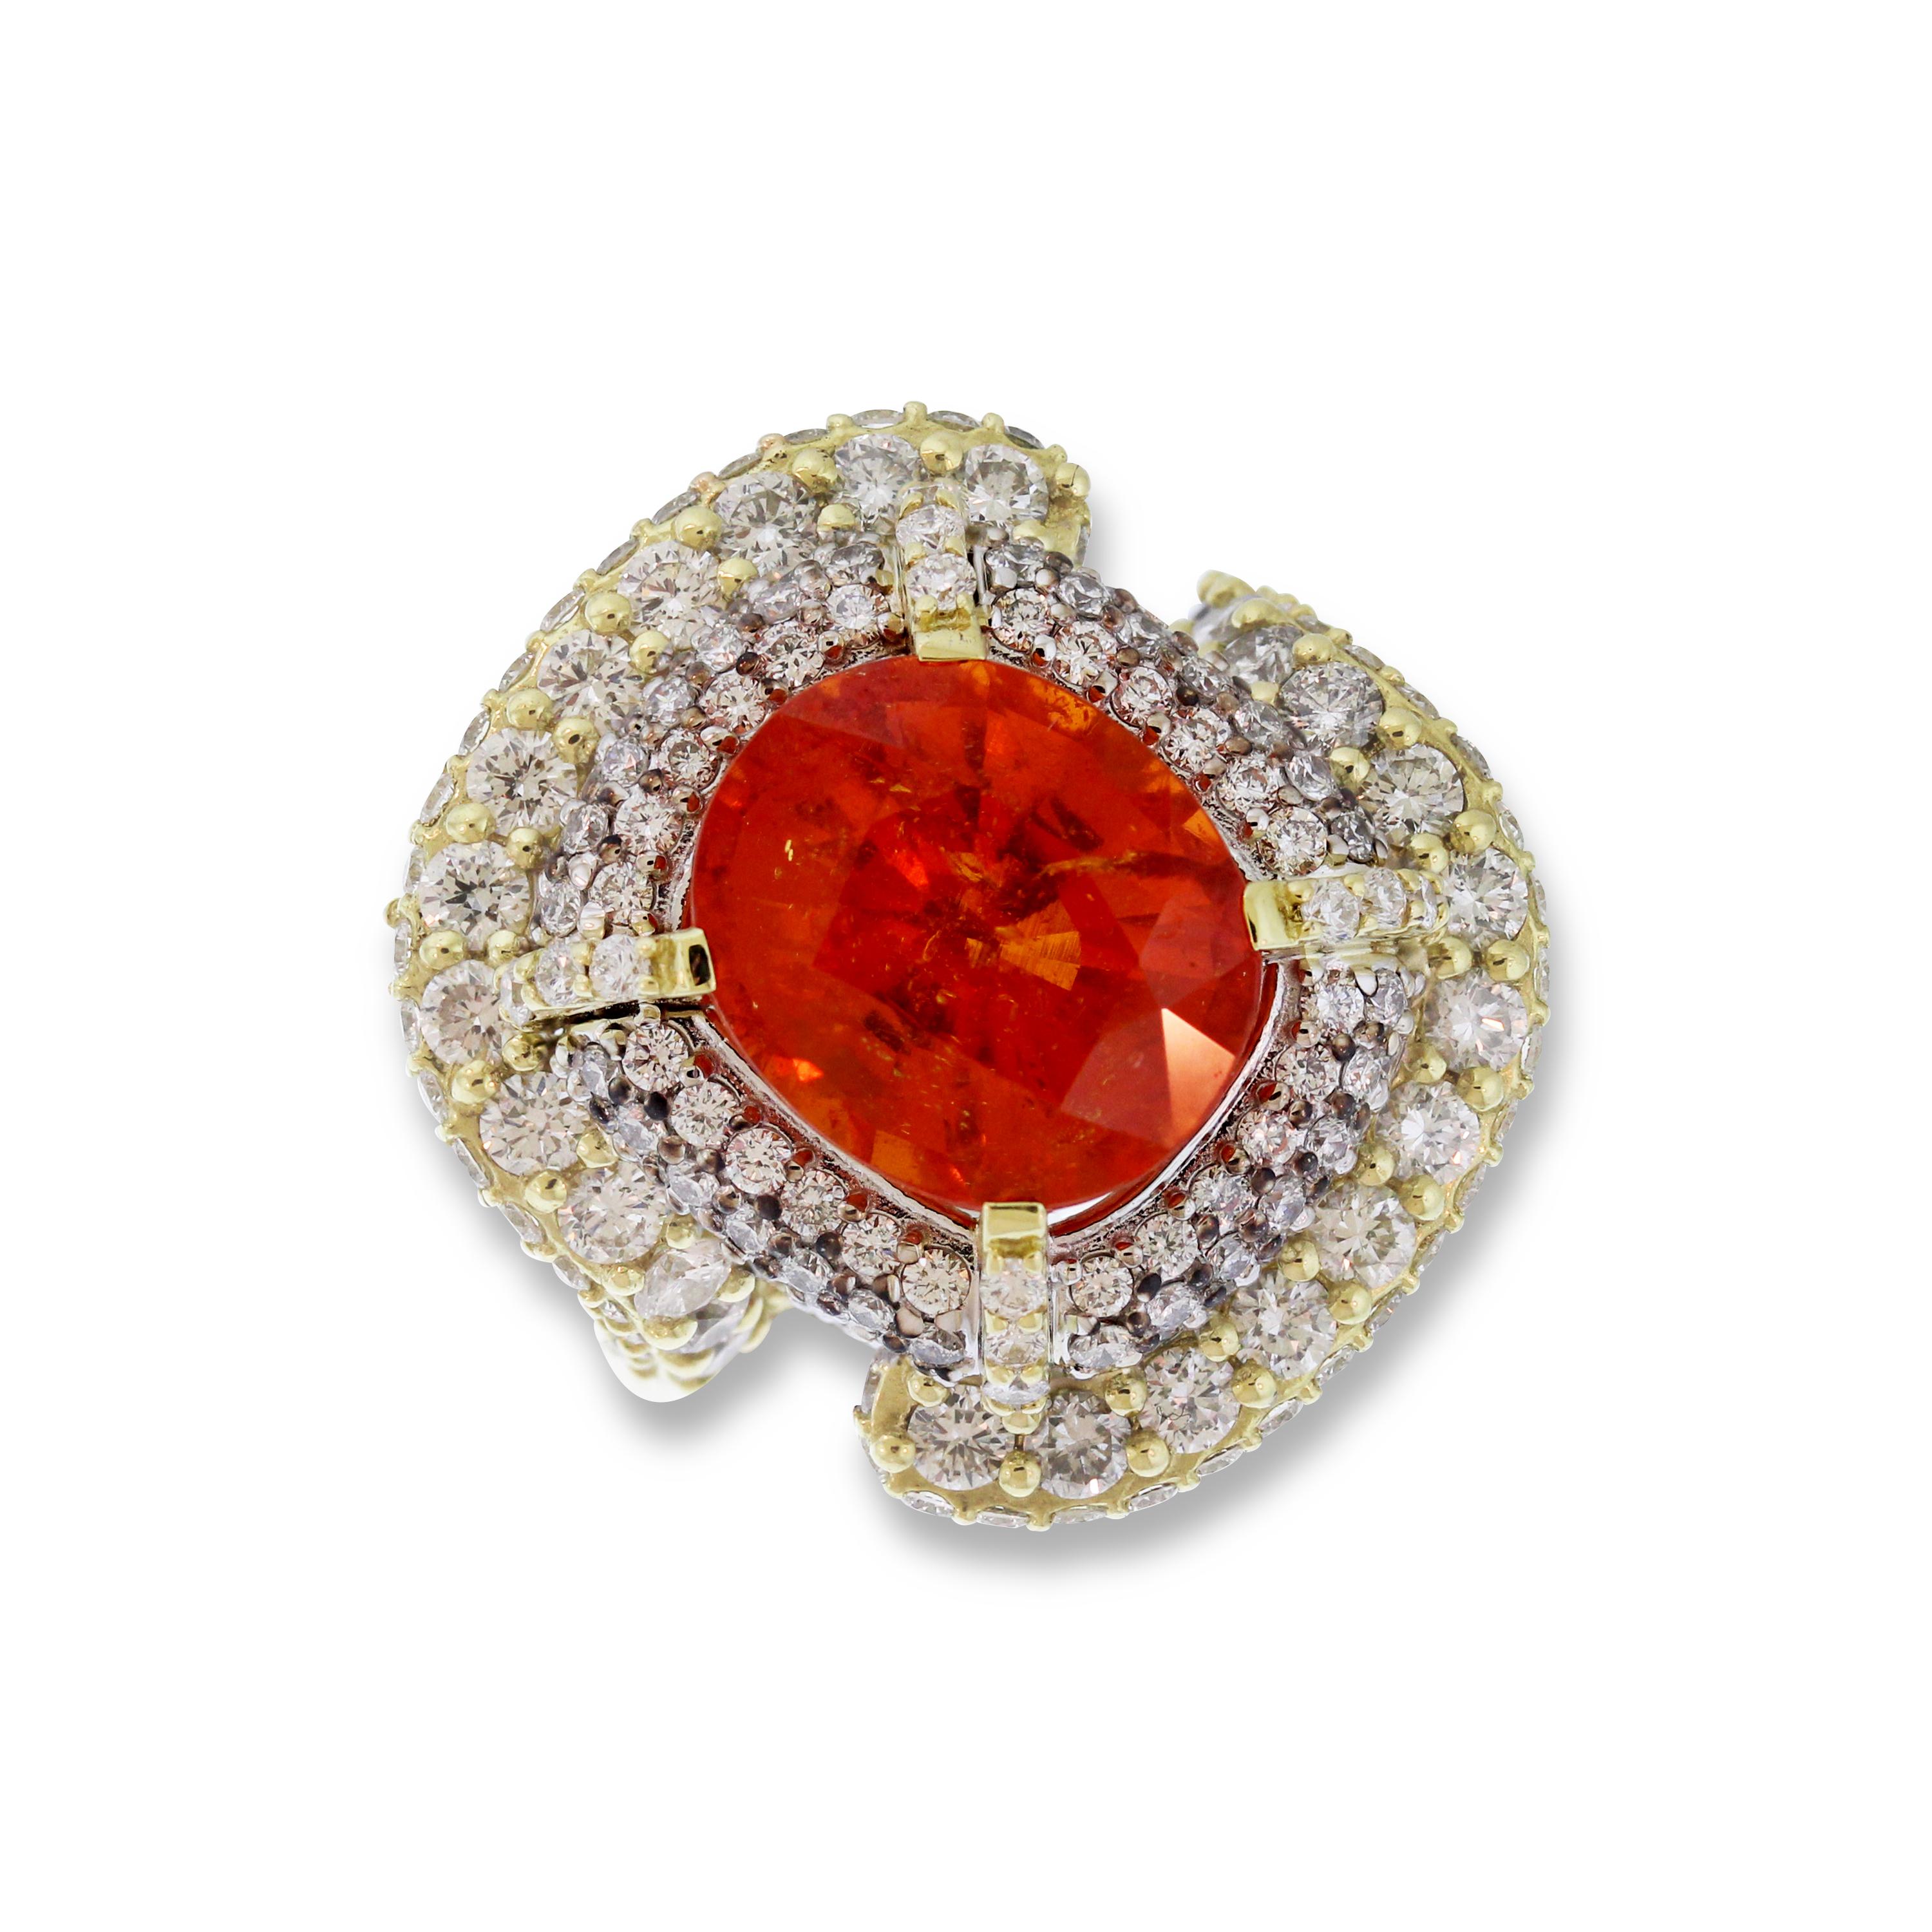 IF YOU ARE REALLY INTERESTED, CONTACT US WITH ANY REASONABLE OFFER. WE WILL TRY OUR BEST TO MAKE YOU HAPPY!

18K Yellow and White Gold Ring with Spessartite Garnet center and Diamonds

This FANTA color Spessartite Garnet truly pops : 8.55 carat